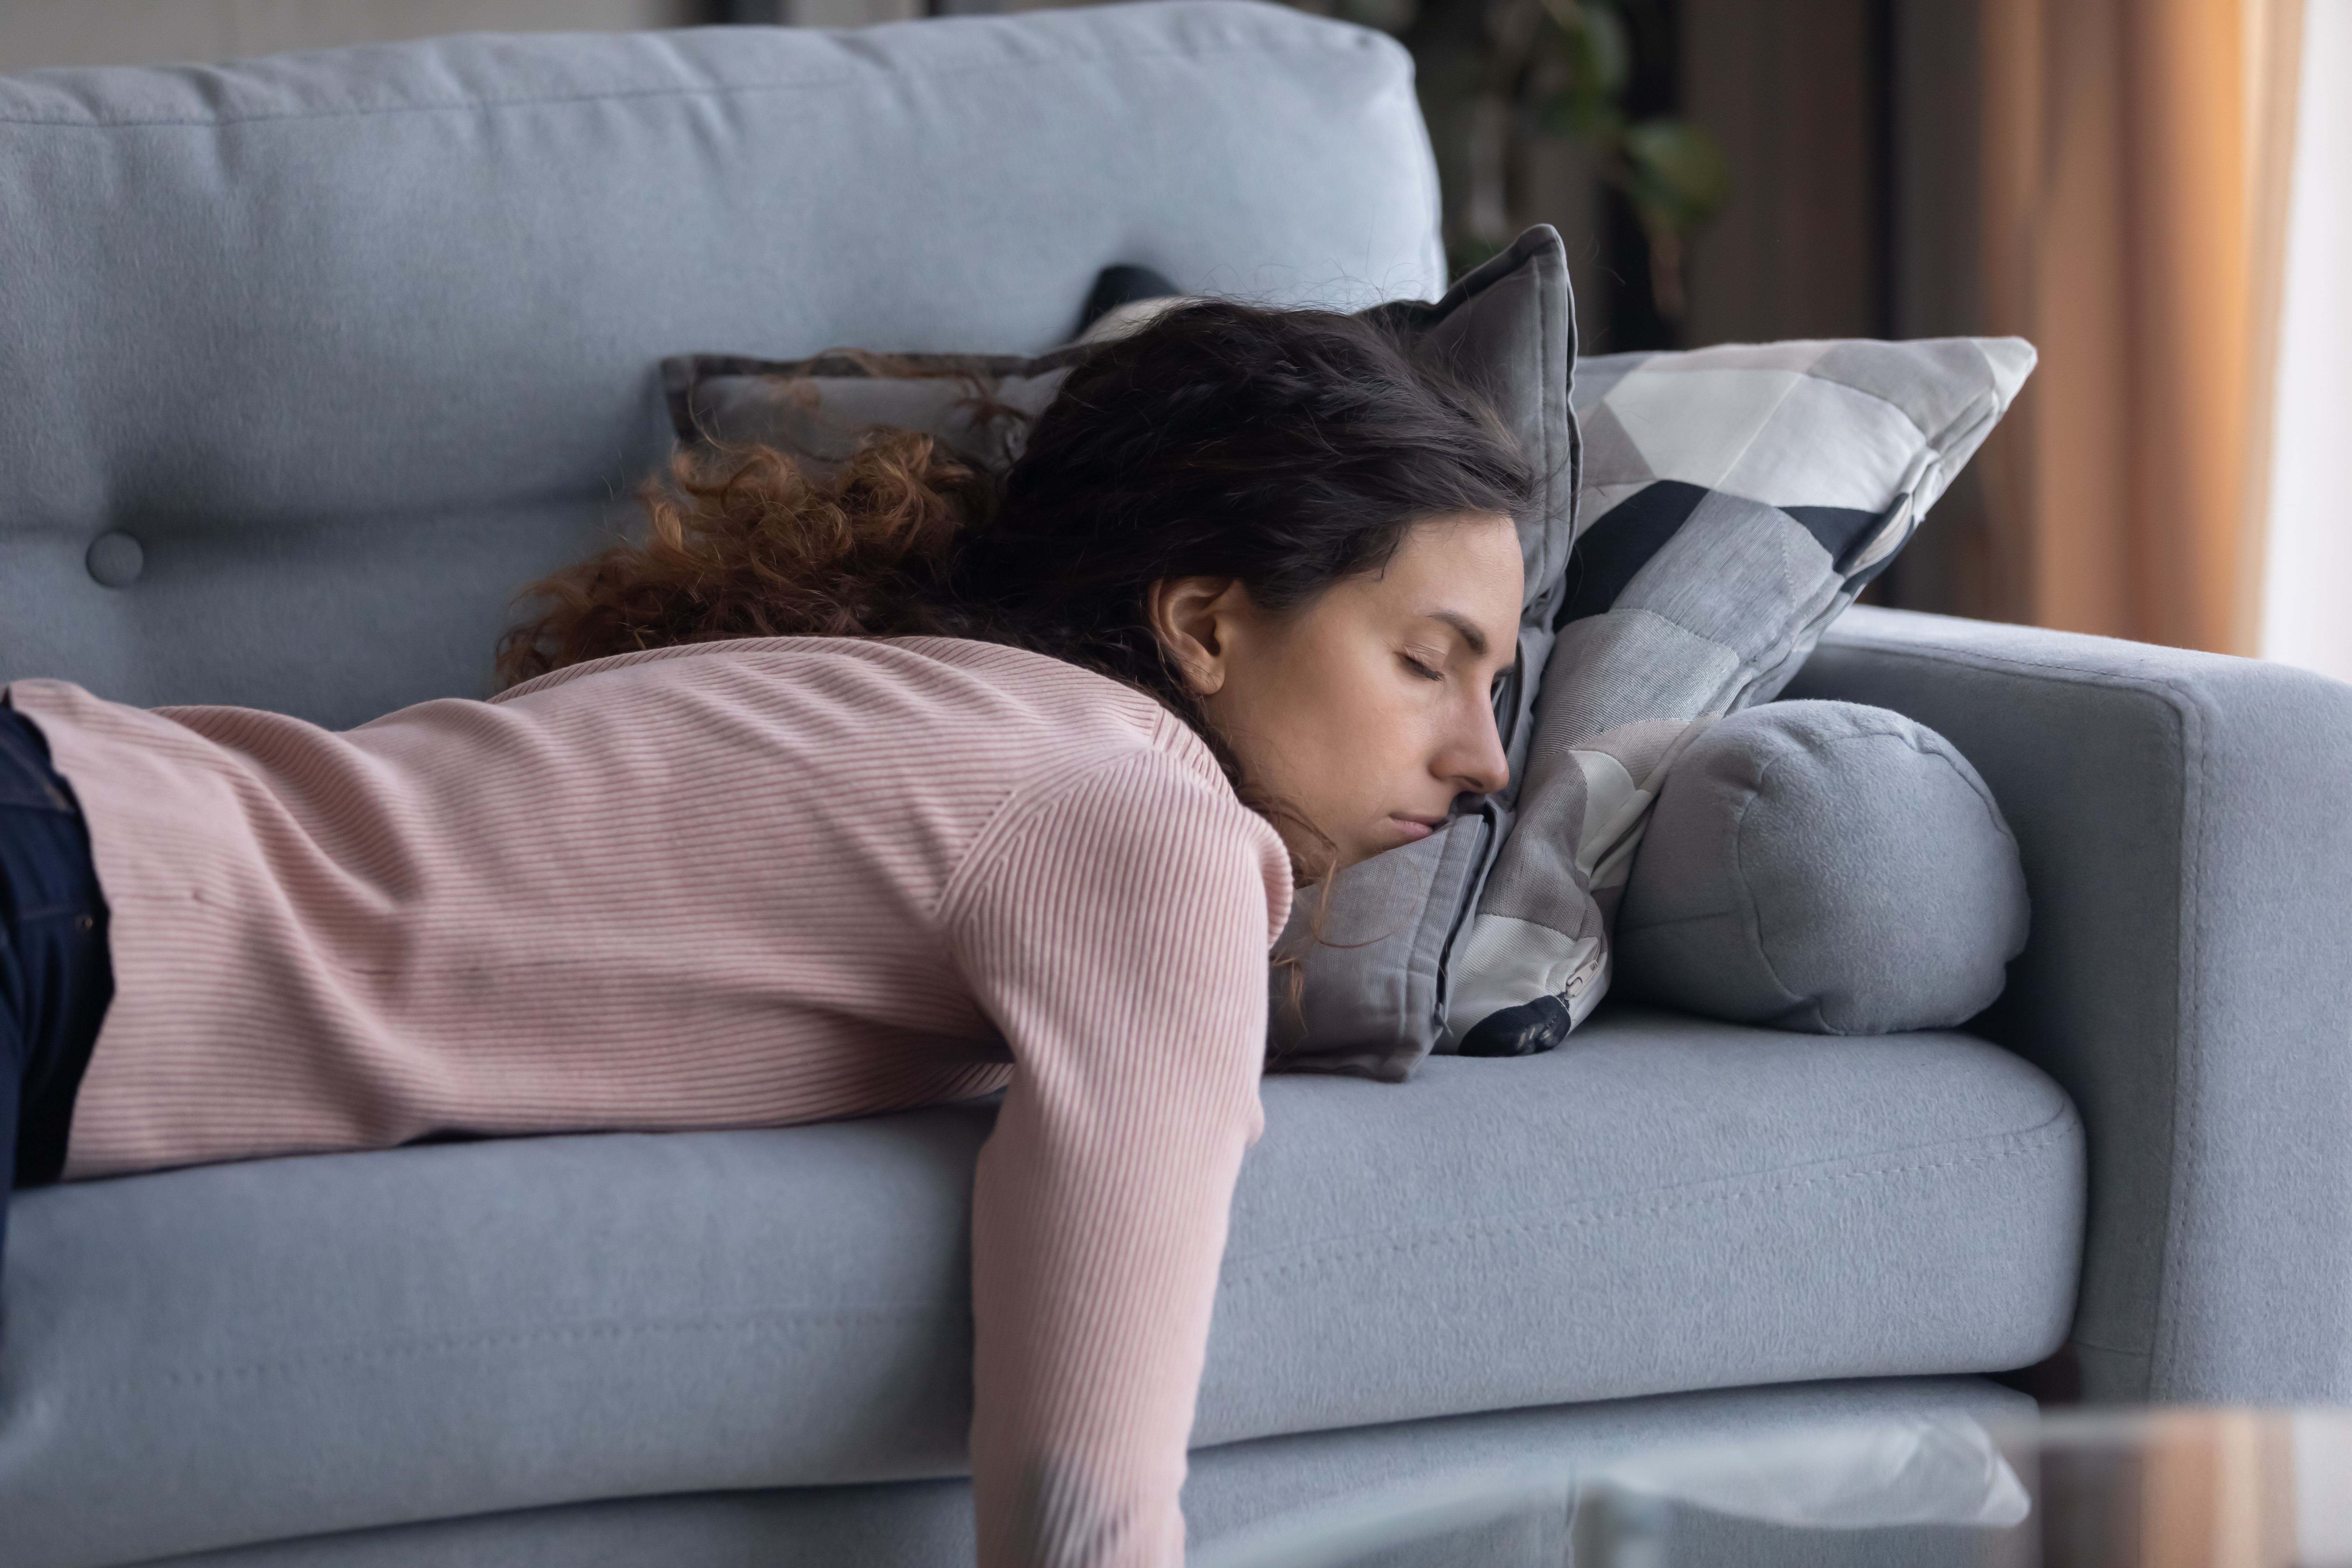 An exhausted woman sleeps on a grey couch. Her head is on two pillows as she sleeps on her stomach and her right arm hangs off the couch. 